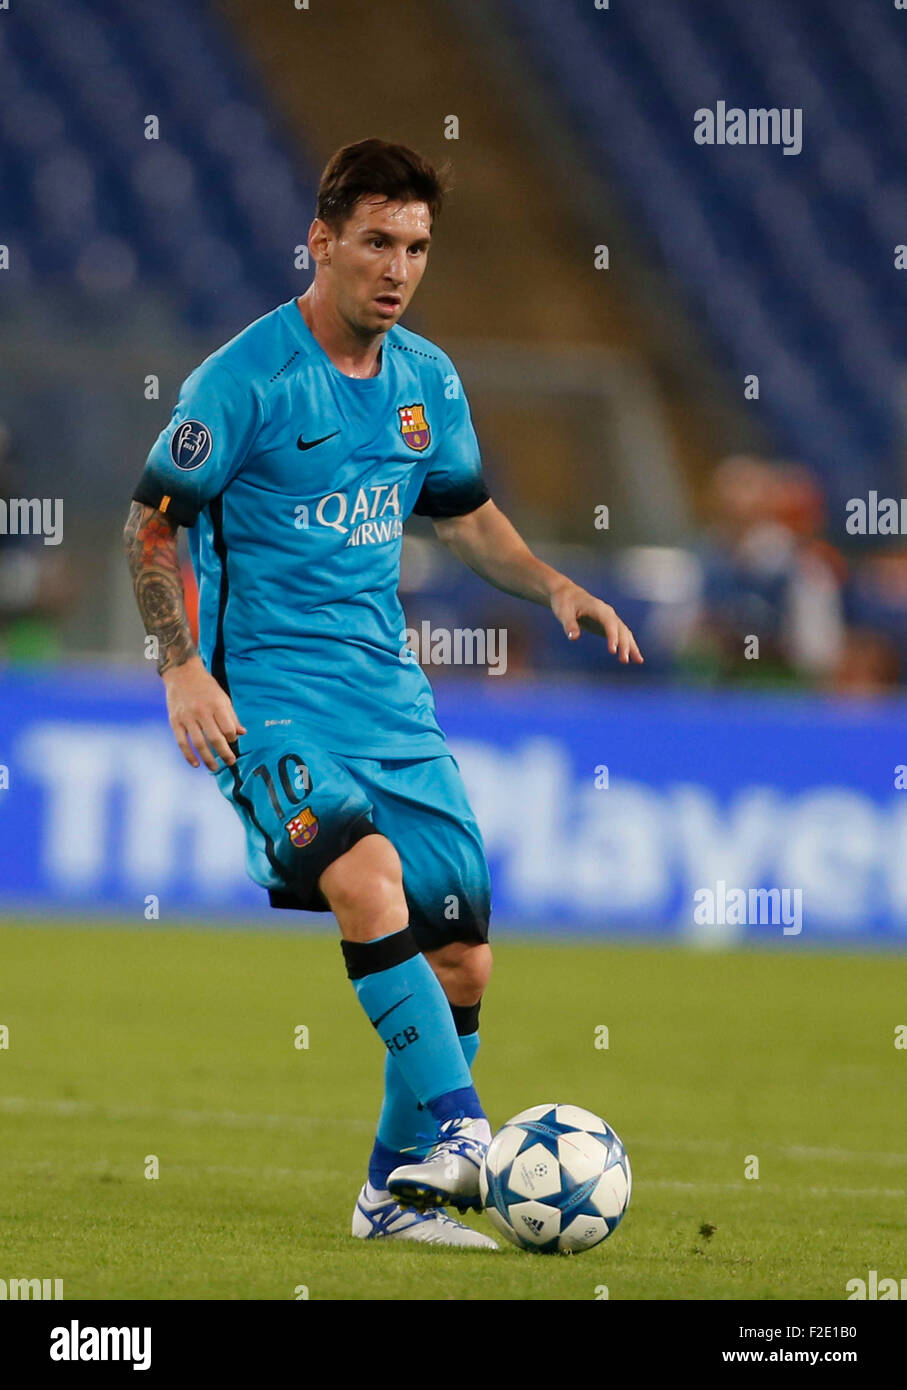 Rome, Italy. 16th Sep, 2015. Barcellona's Lionel Messi controls the ball  during the Champions League Group E soccer match against AS Roma   at the Olympic Stadium in Rome September 16, 2015 Credit:  agnfoto/Alamy Live News Stock Photo